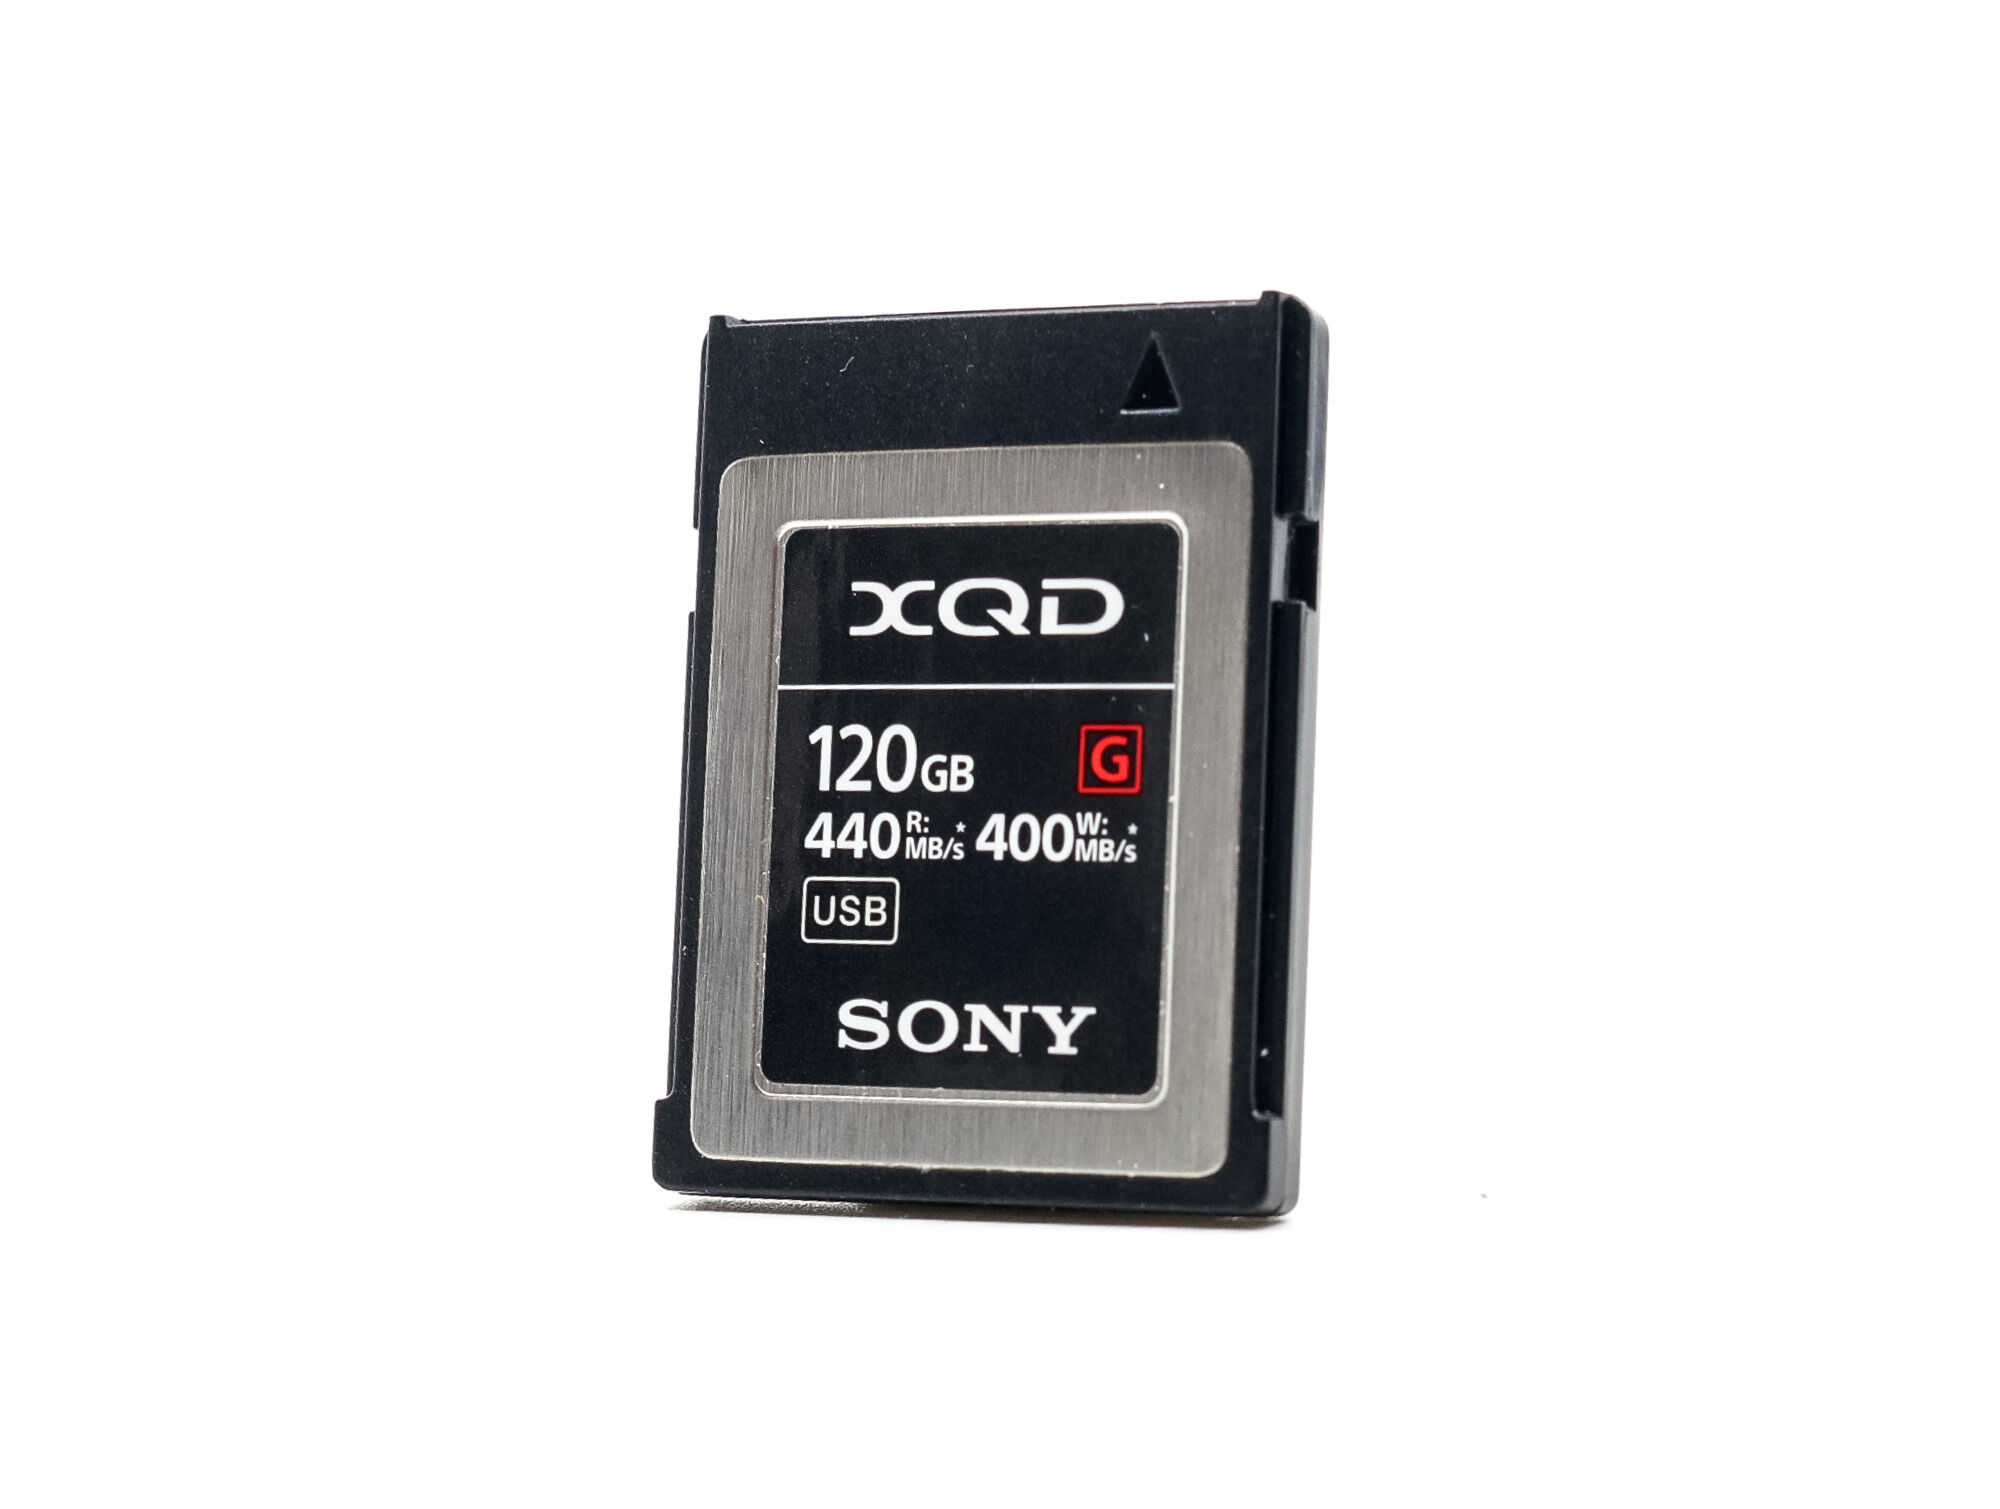 Sony XQD G 120GB 440MB/s Card (Condition: Like New)